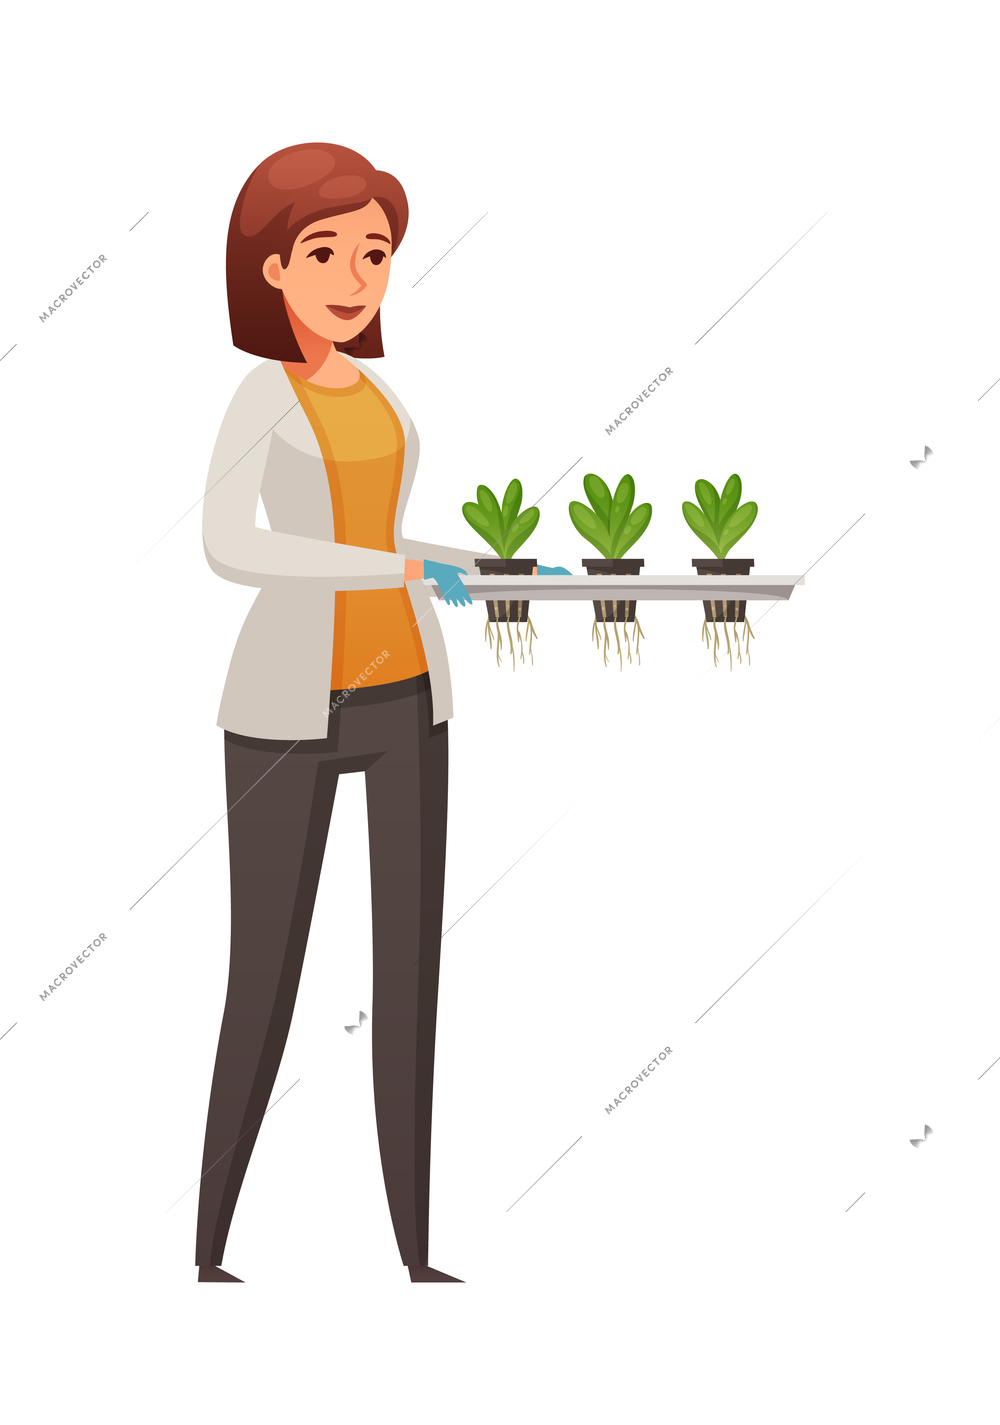 Greenhouse vertical farming hydroponics aeroponics cartoon composition with female worker holding sprigs vector illustration